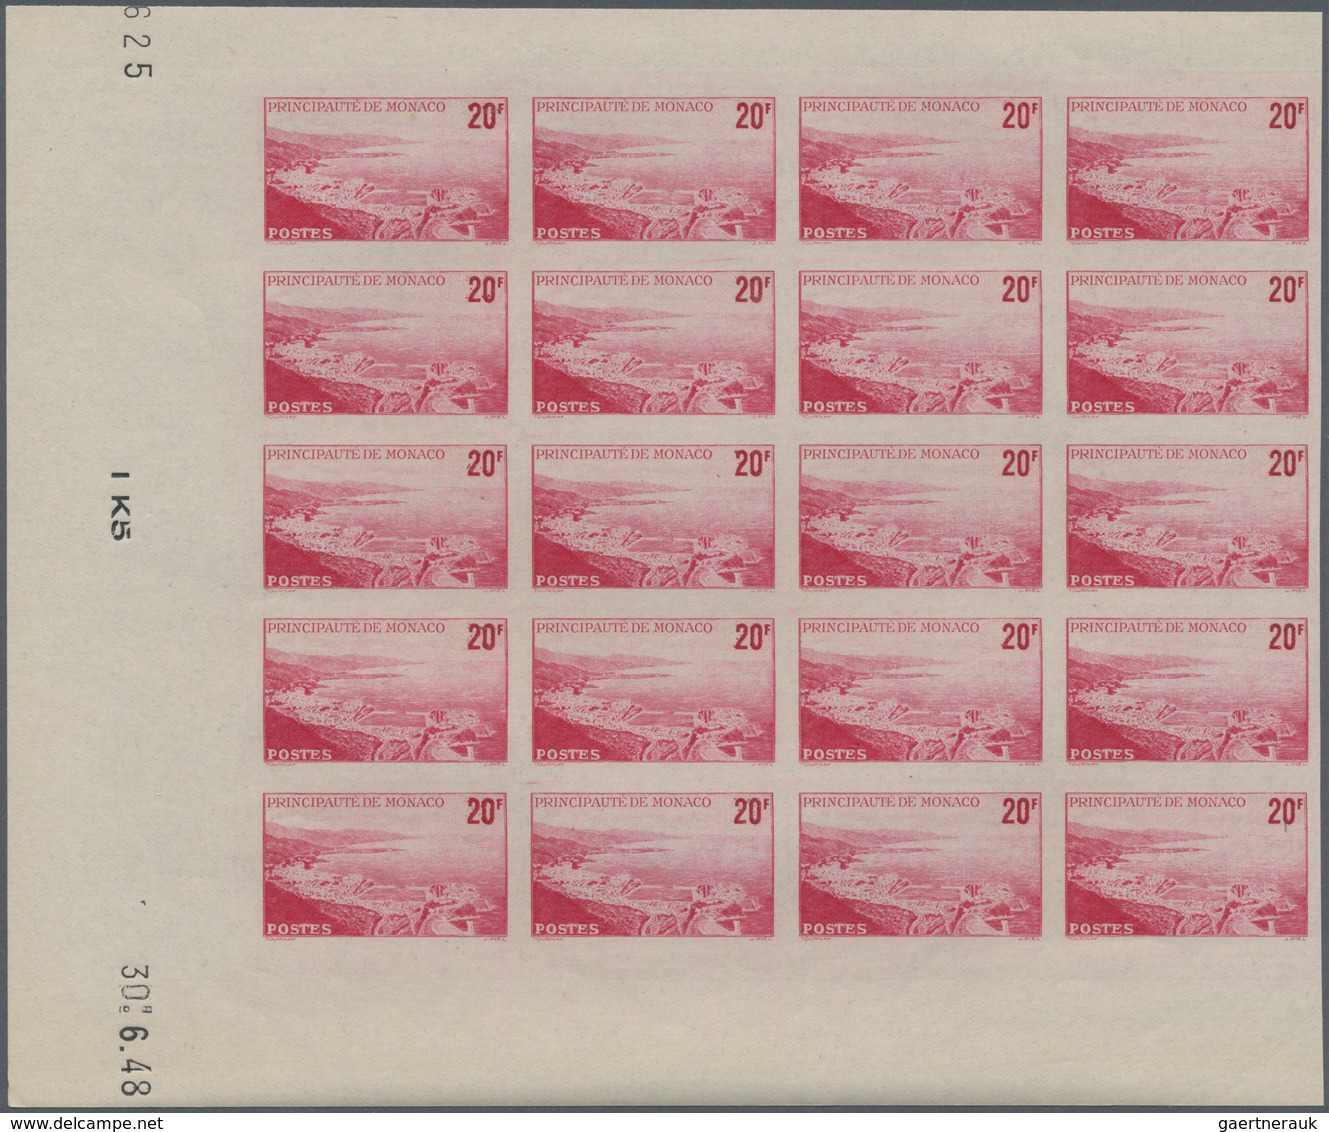 Monaco: 1948/1949, pictorial definitives complete set of 13 in IMPERFORATE blocks of 20 from lower m